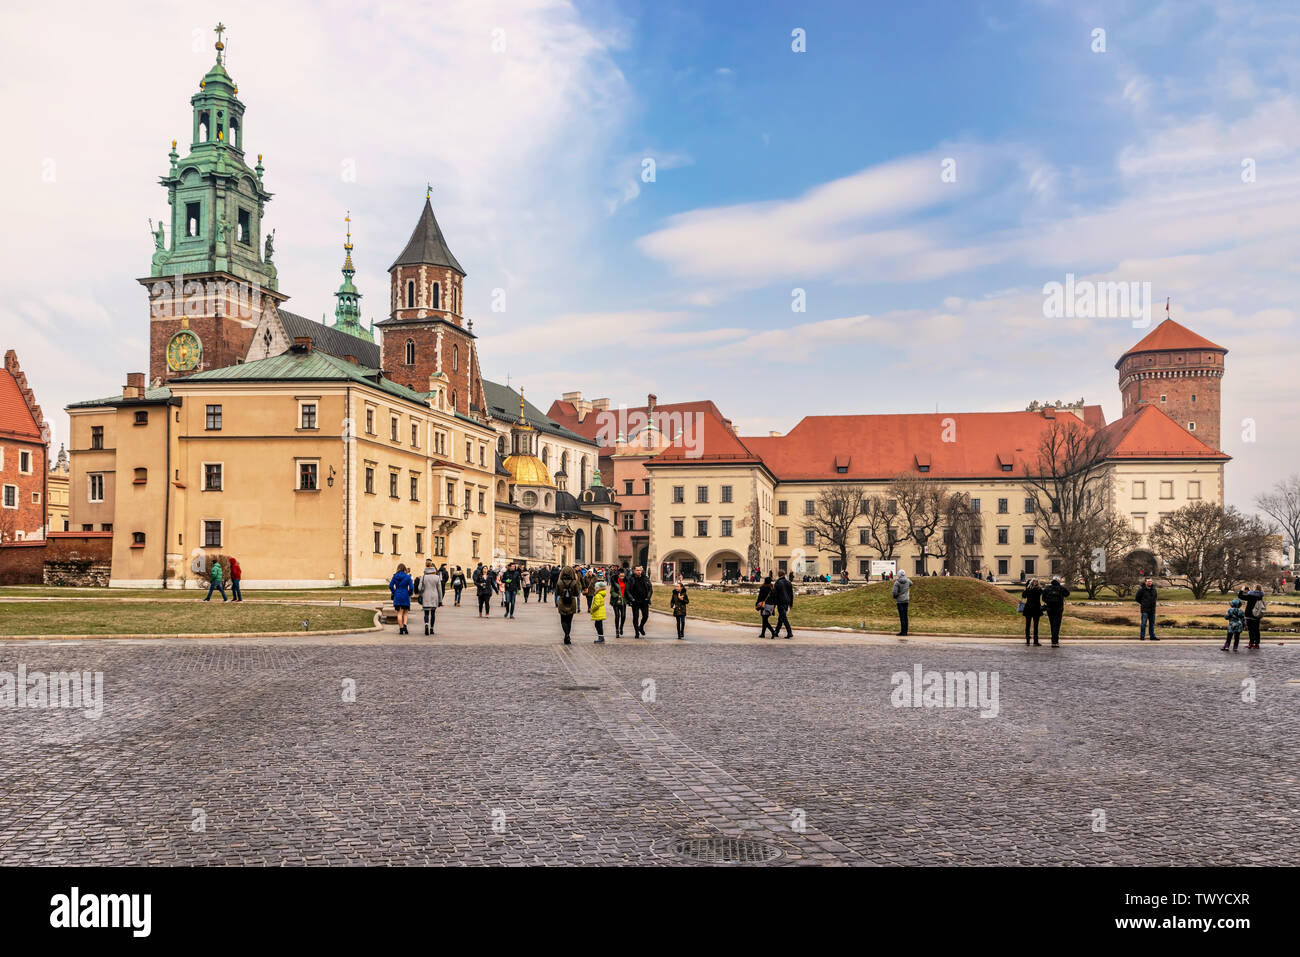 Cracow, Poland - Feb 3, 2019: View at Wawel Cathedral, Royal Castle area, Cracow, UNESCO World Heritage Site, Poland, Europe Stock Photo